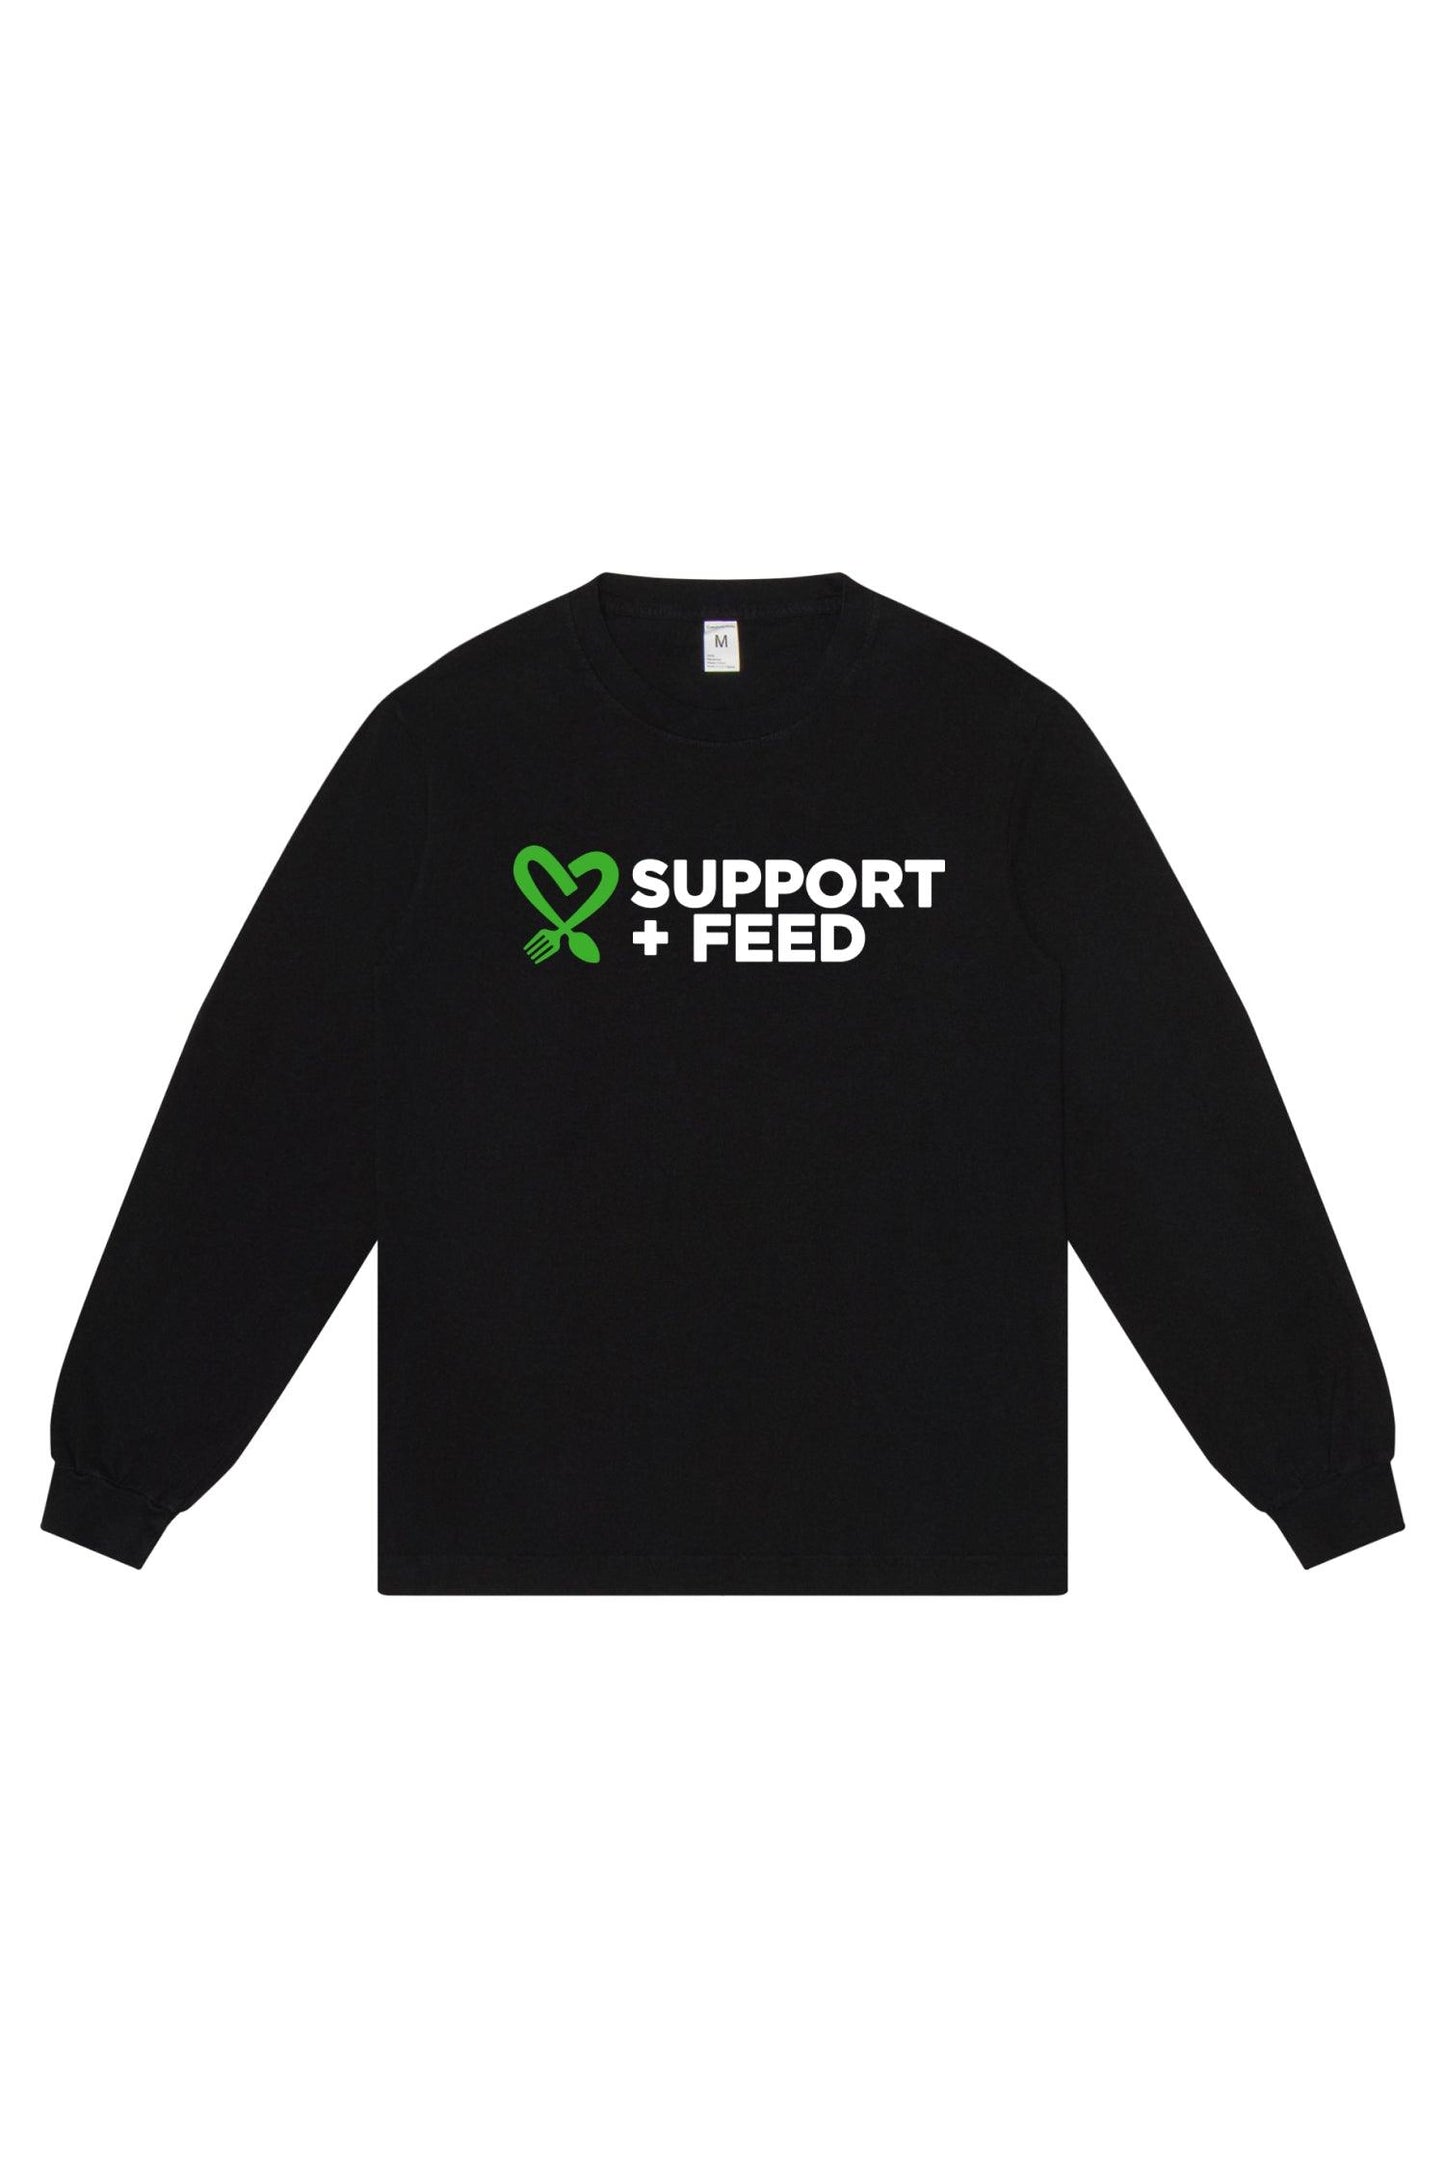 Support + Feed Long Sleeve - Everybody.World